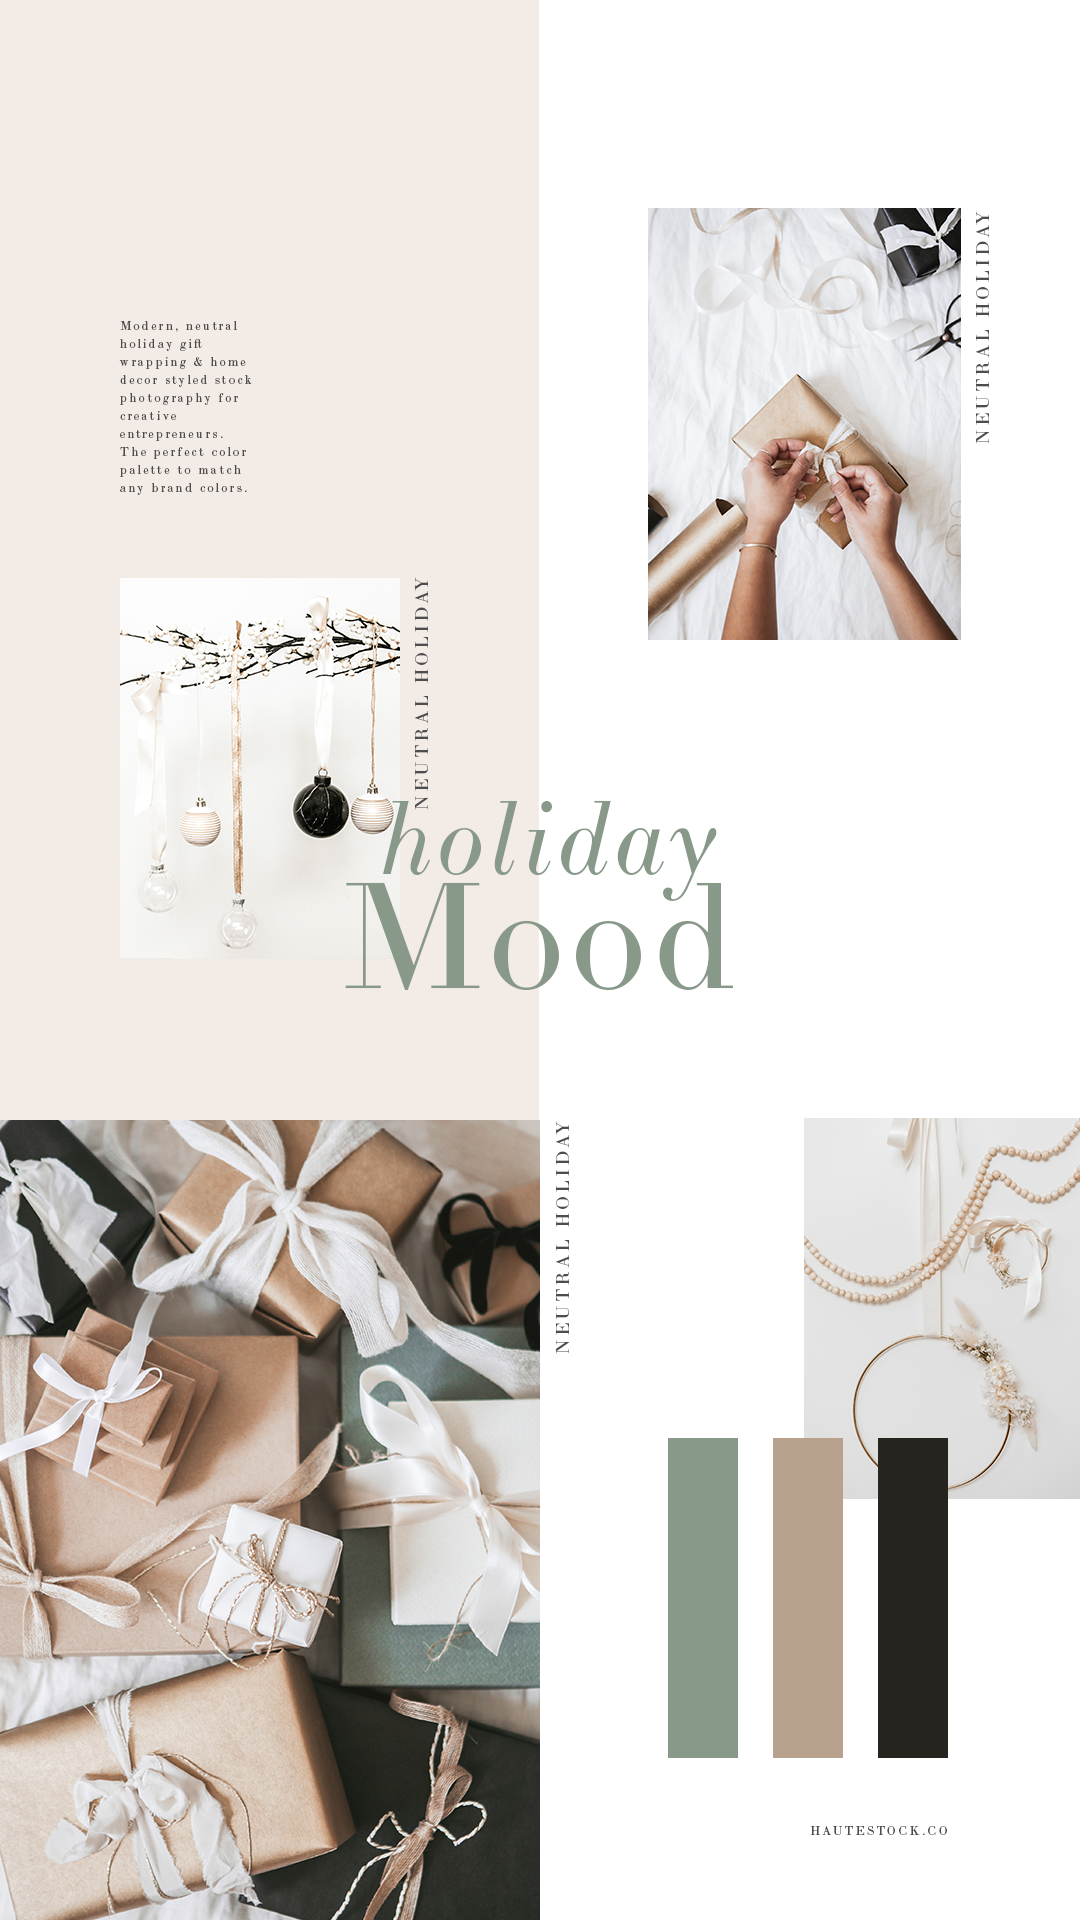 Modern, neutral holiday gift wrapping & home decor styled stock photography for creative entrepreneurs. The perfect color palette to match any brand colors.